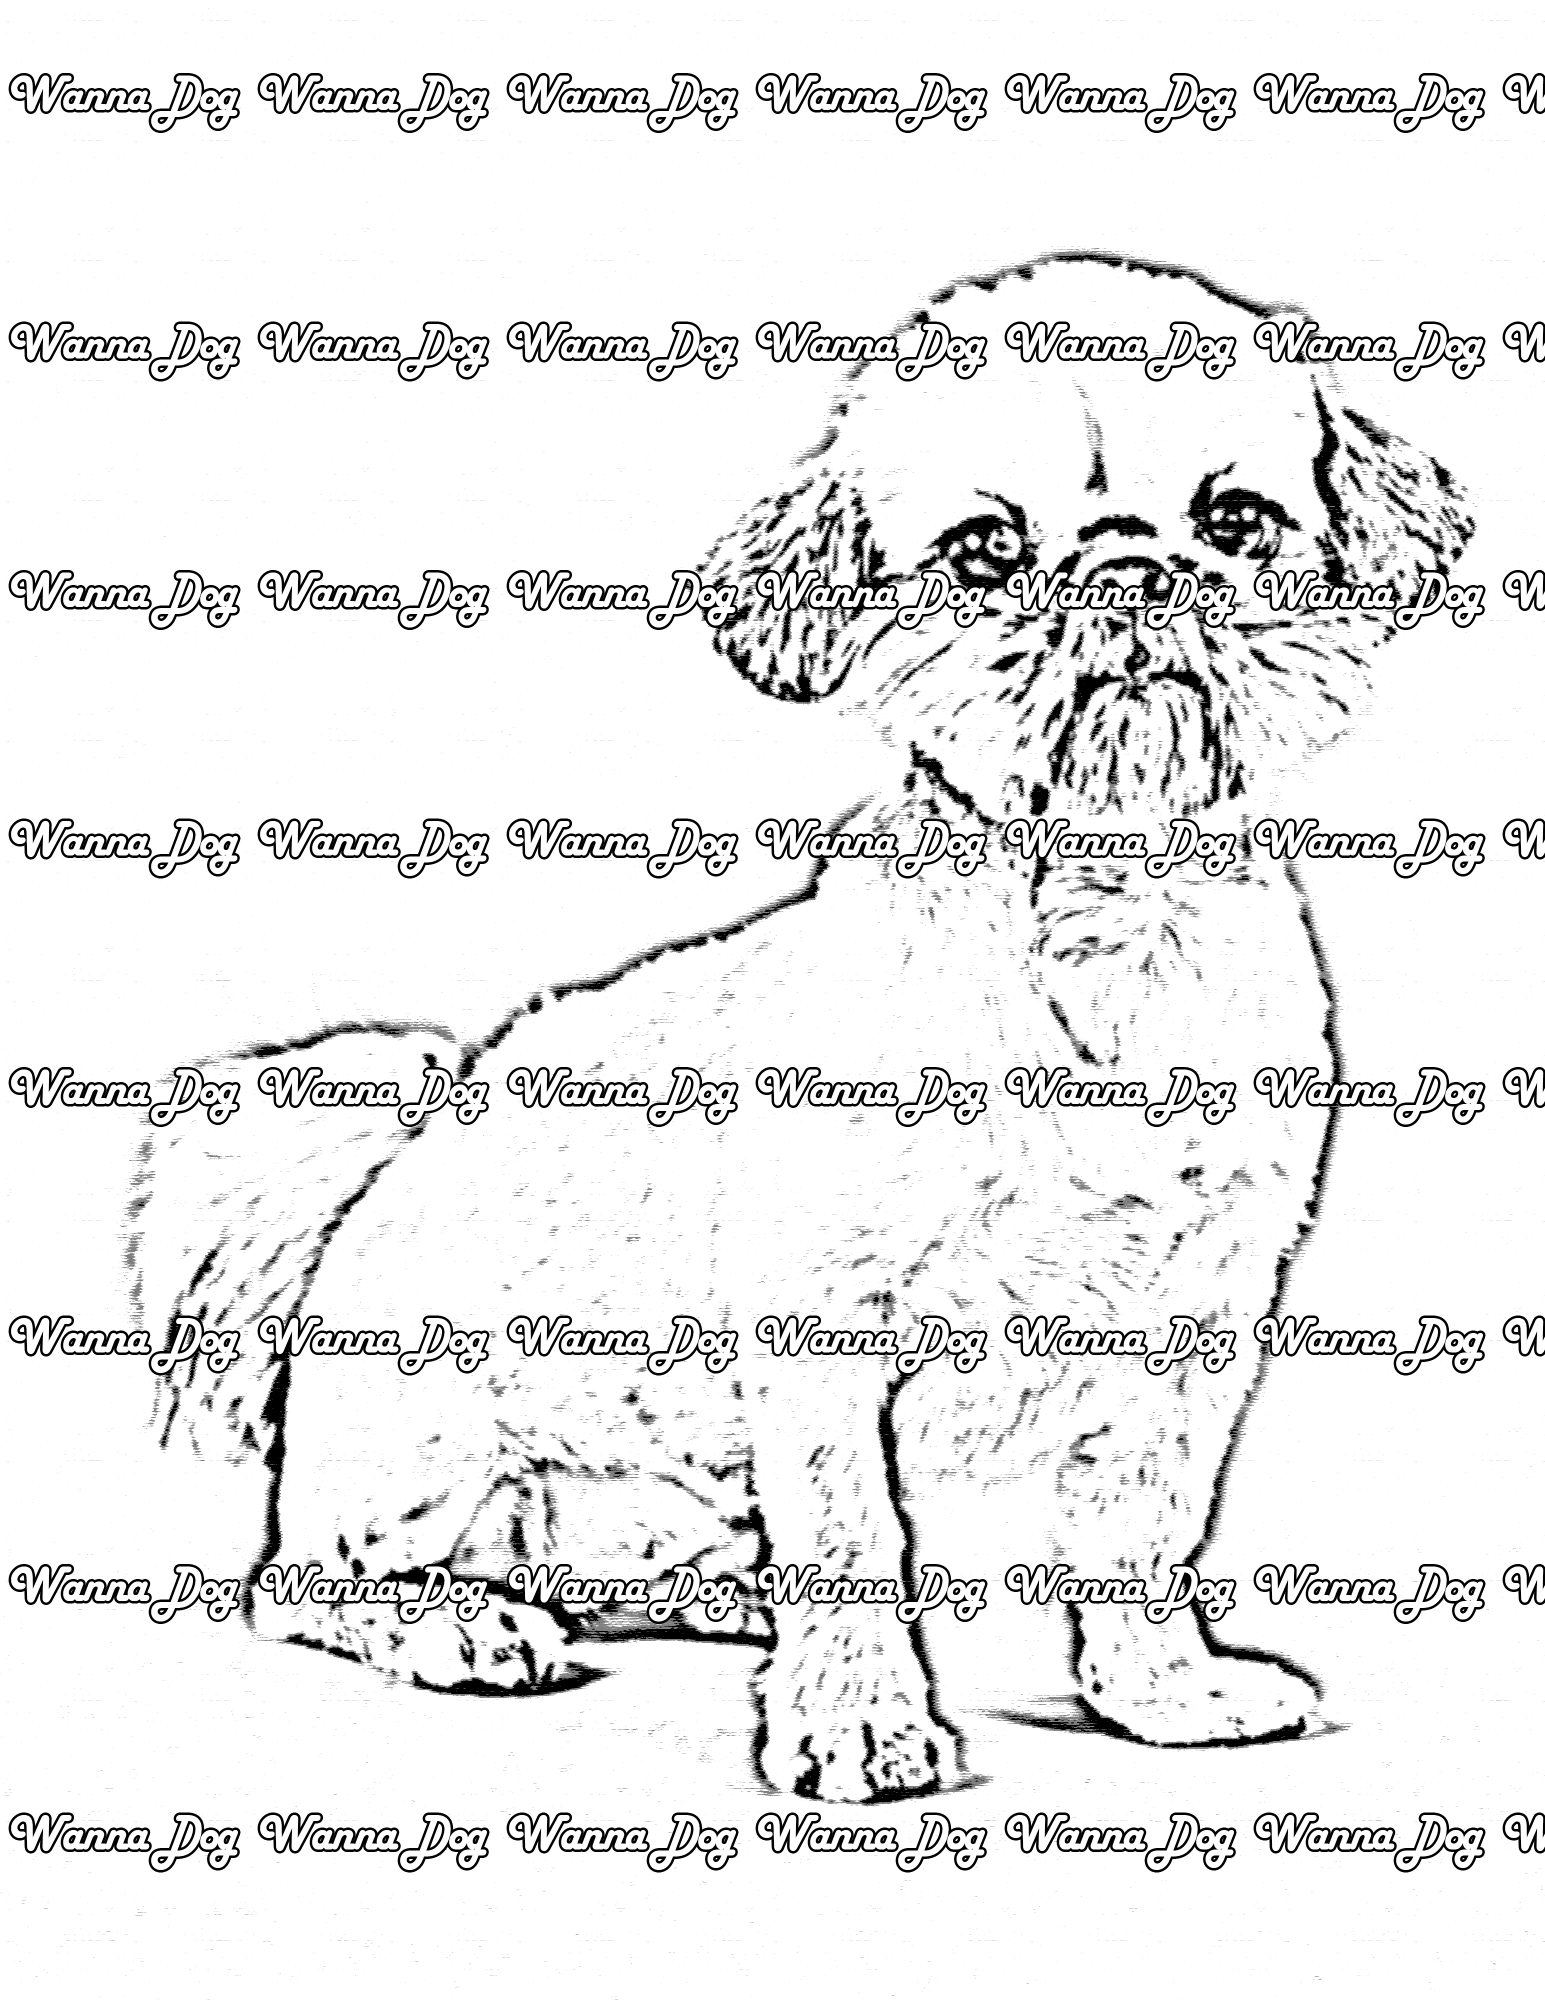 Pekingese Coloring Page of a Pekingese sitting and looking at the camera